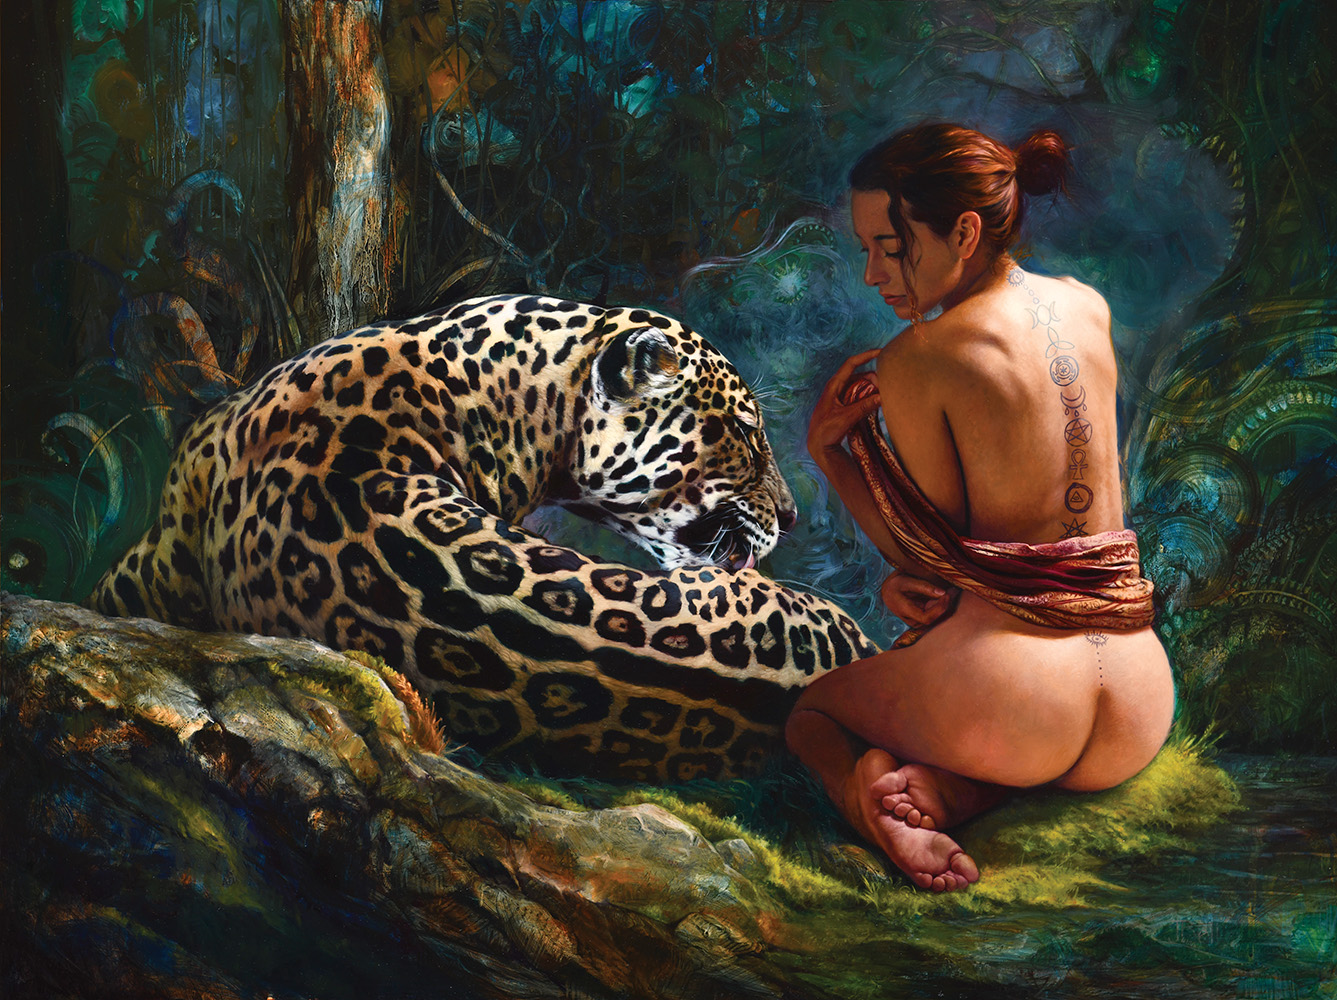 A woman sitting in a forest oasis with a jaguar.